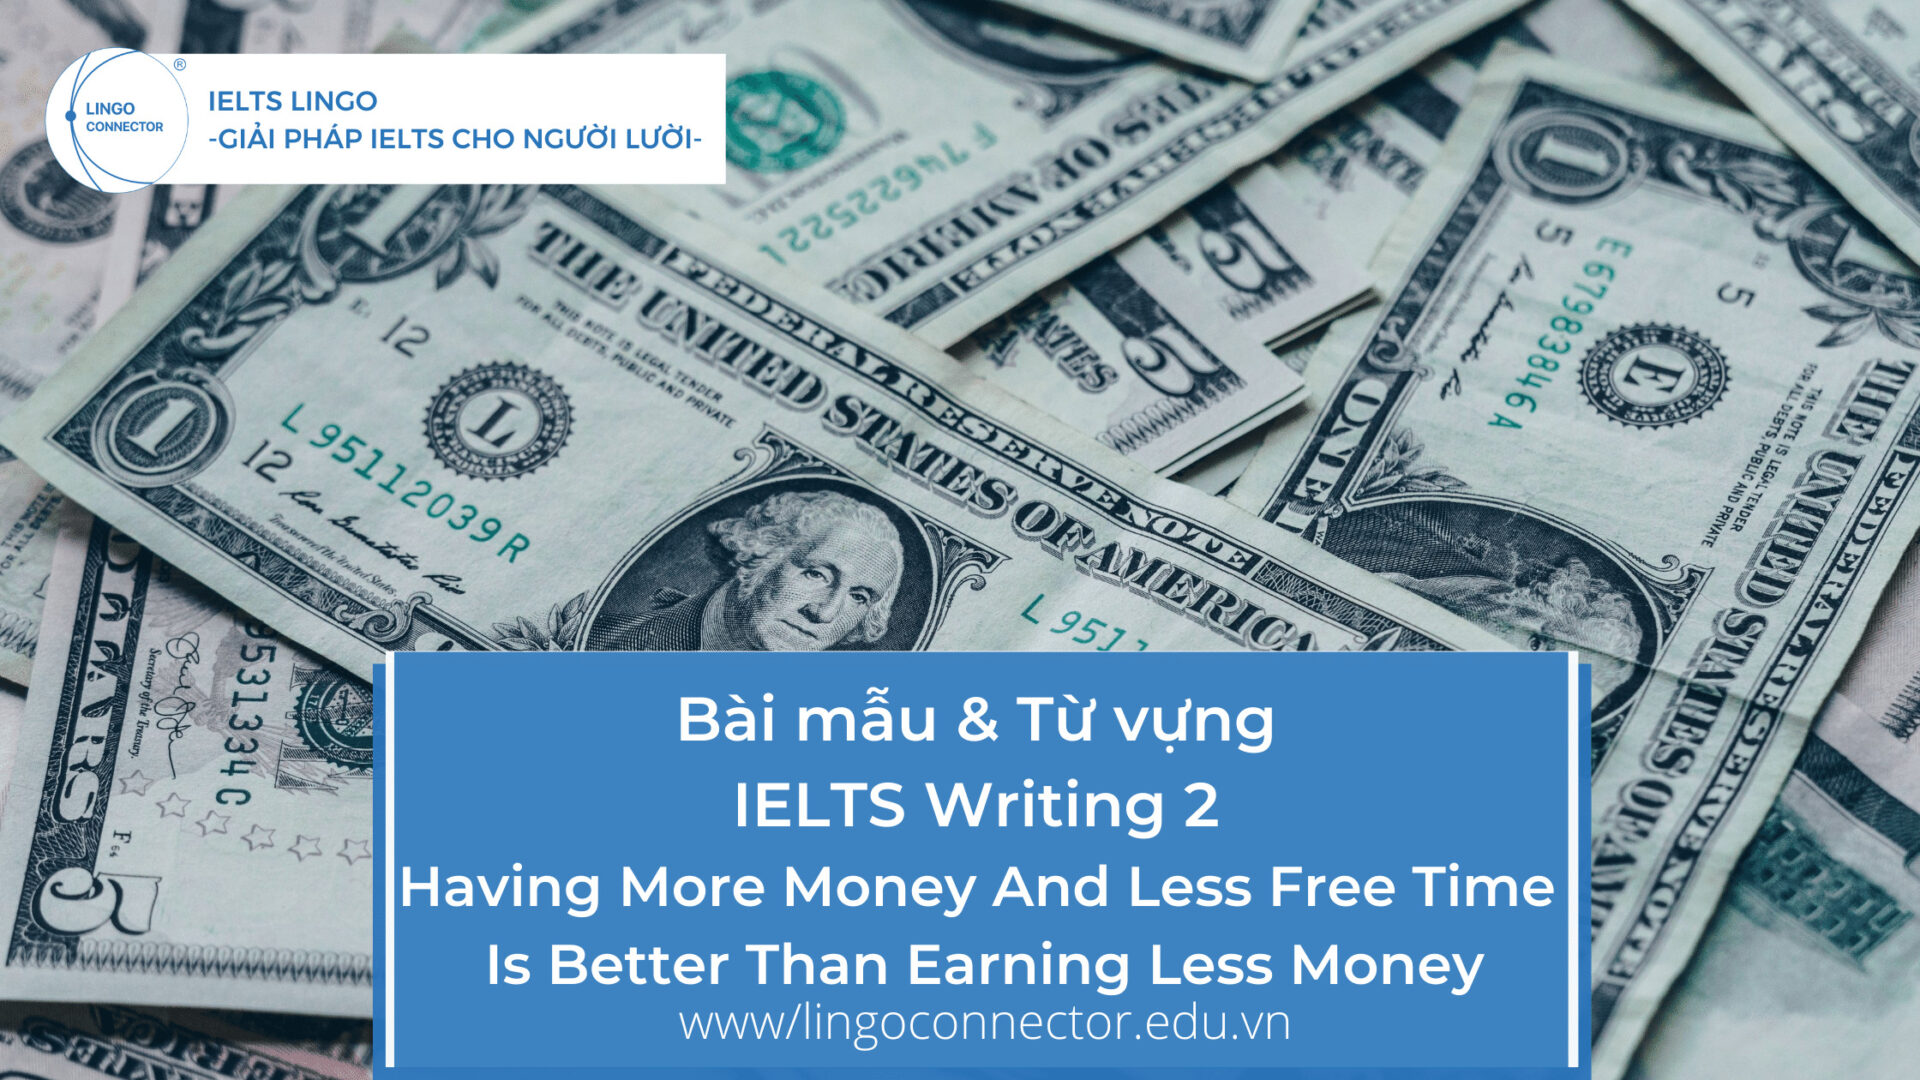 Having More Money And Less Free Time Is Better Than Earning Less Money